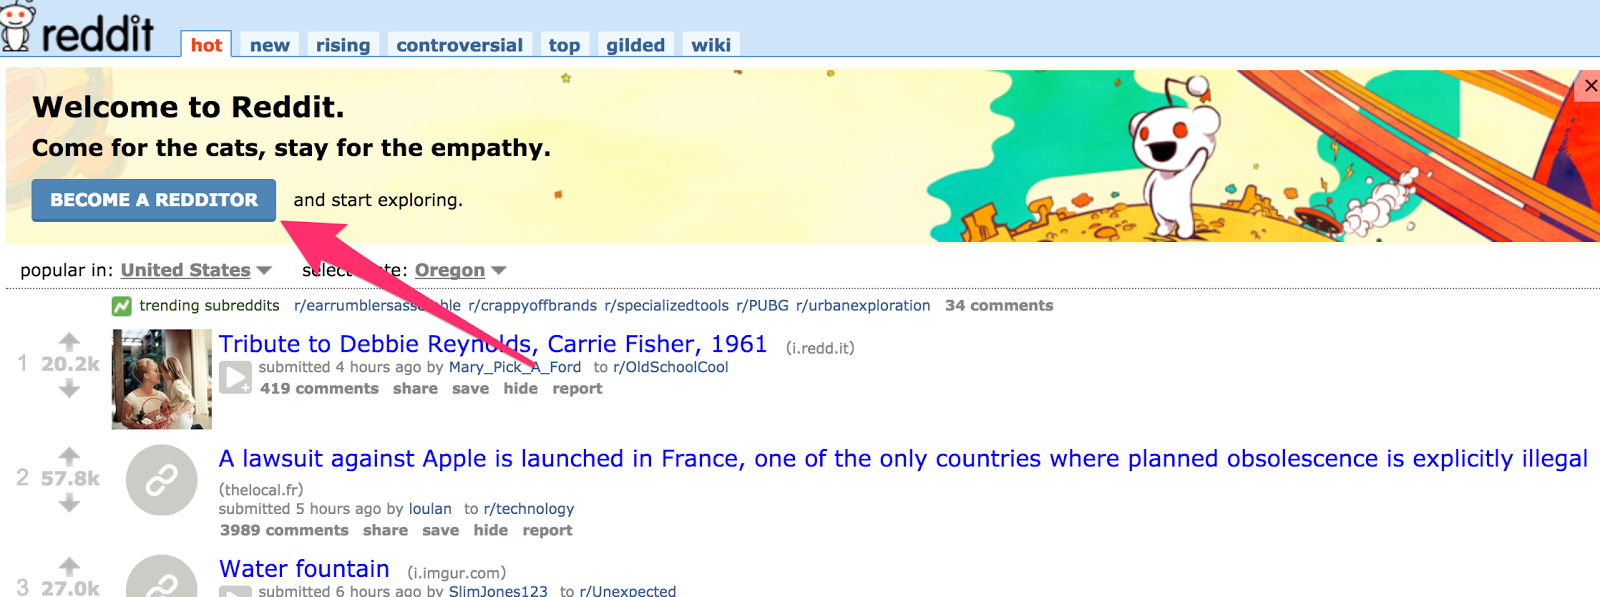 reddit the front page of the internet